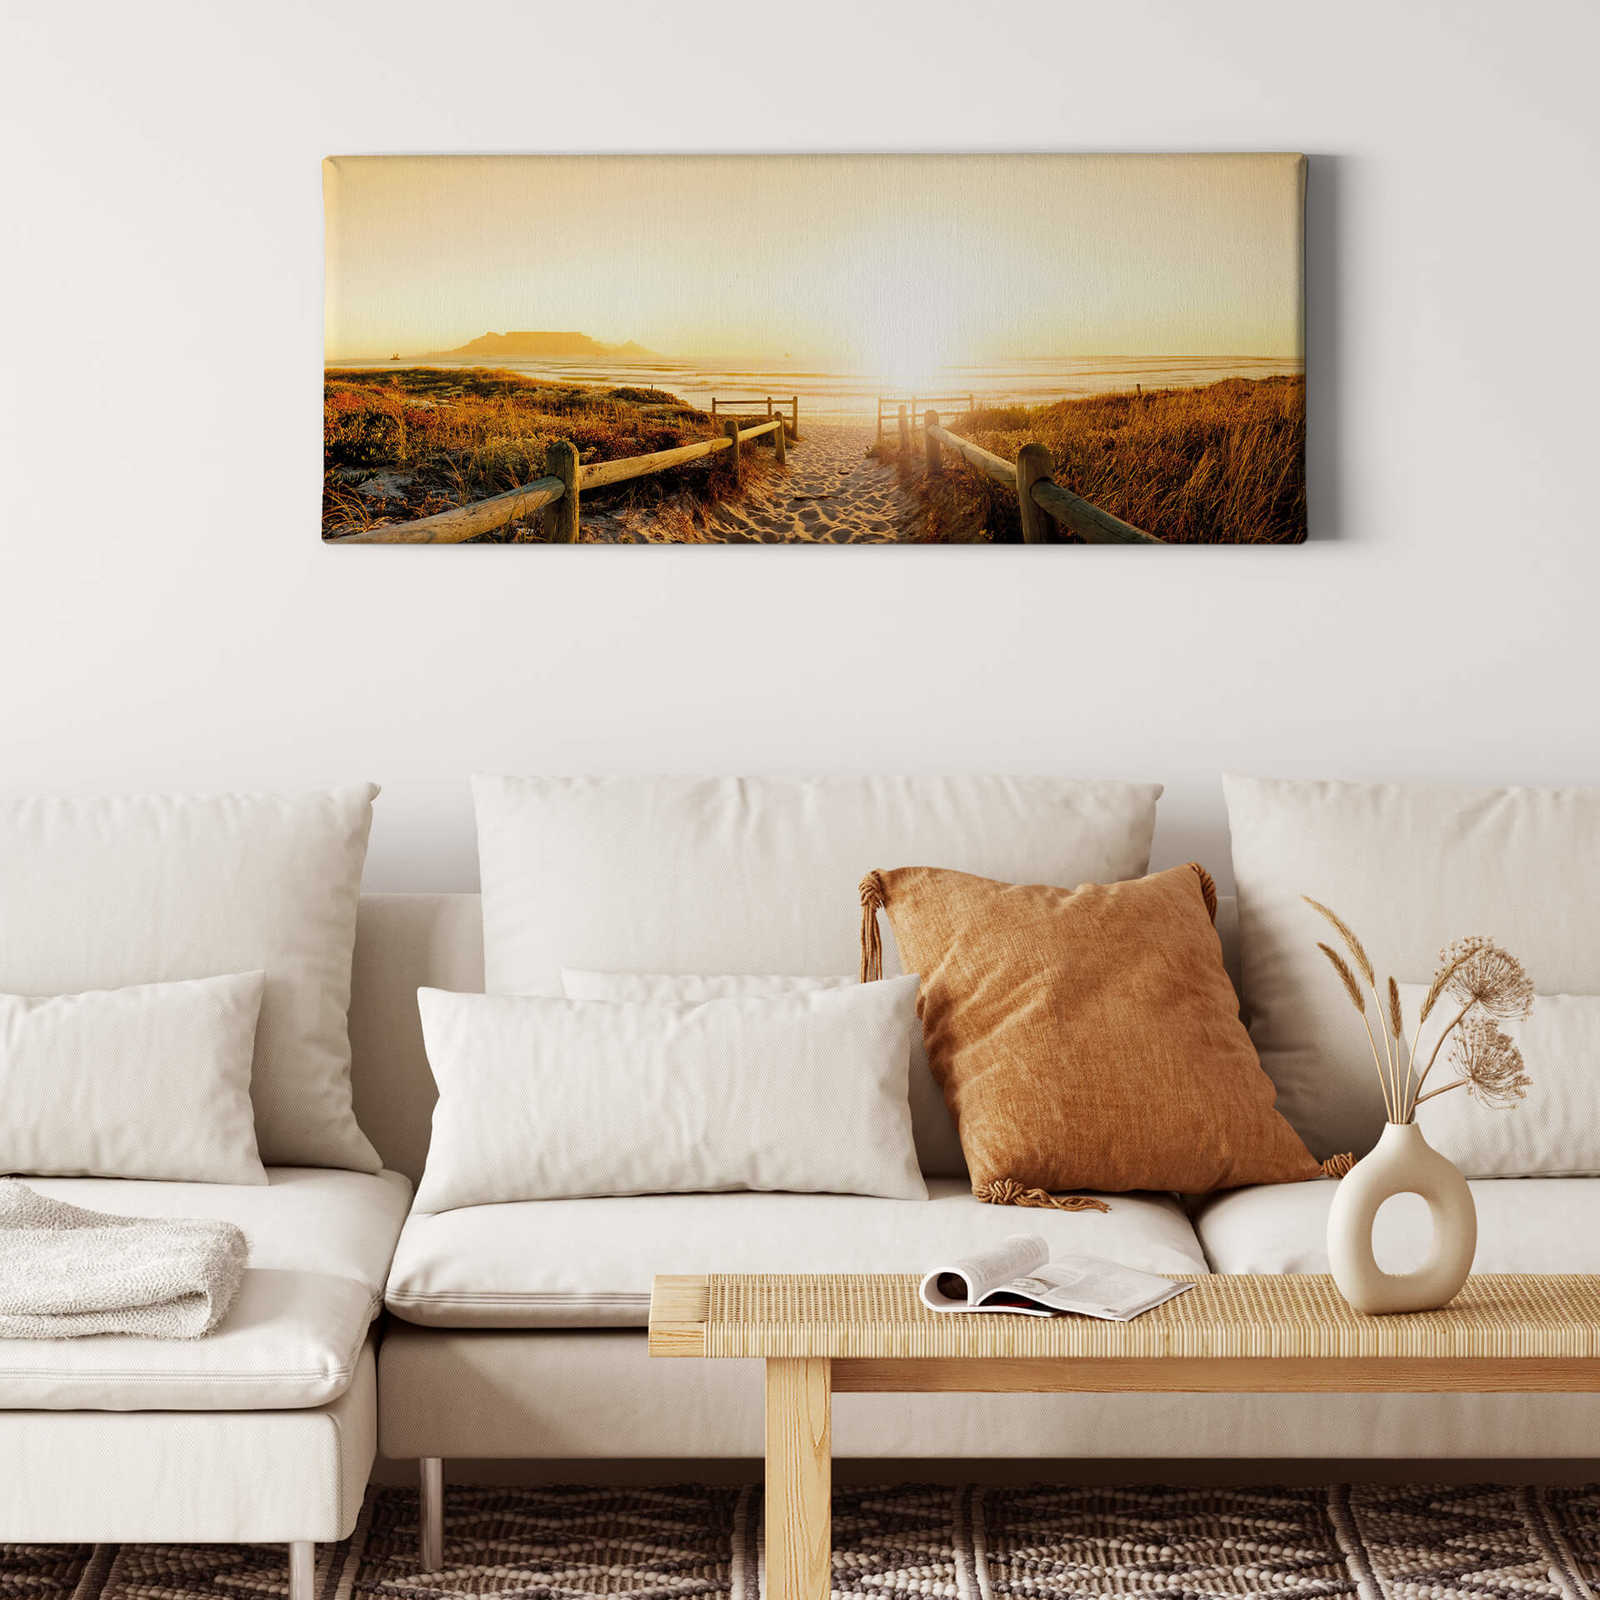             Panoramic canvas picture sunset at the beach
        